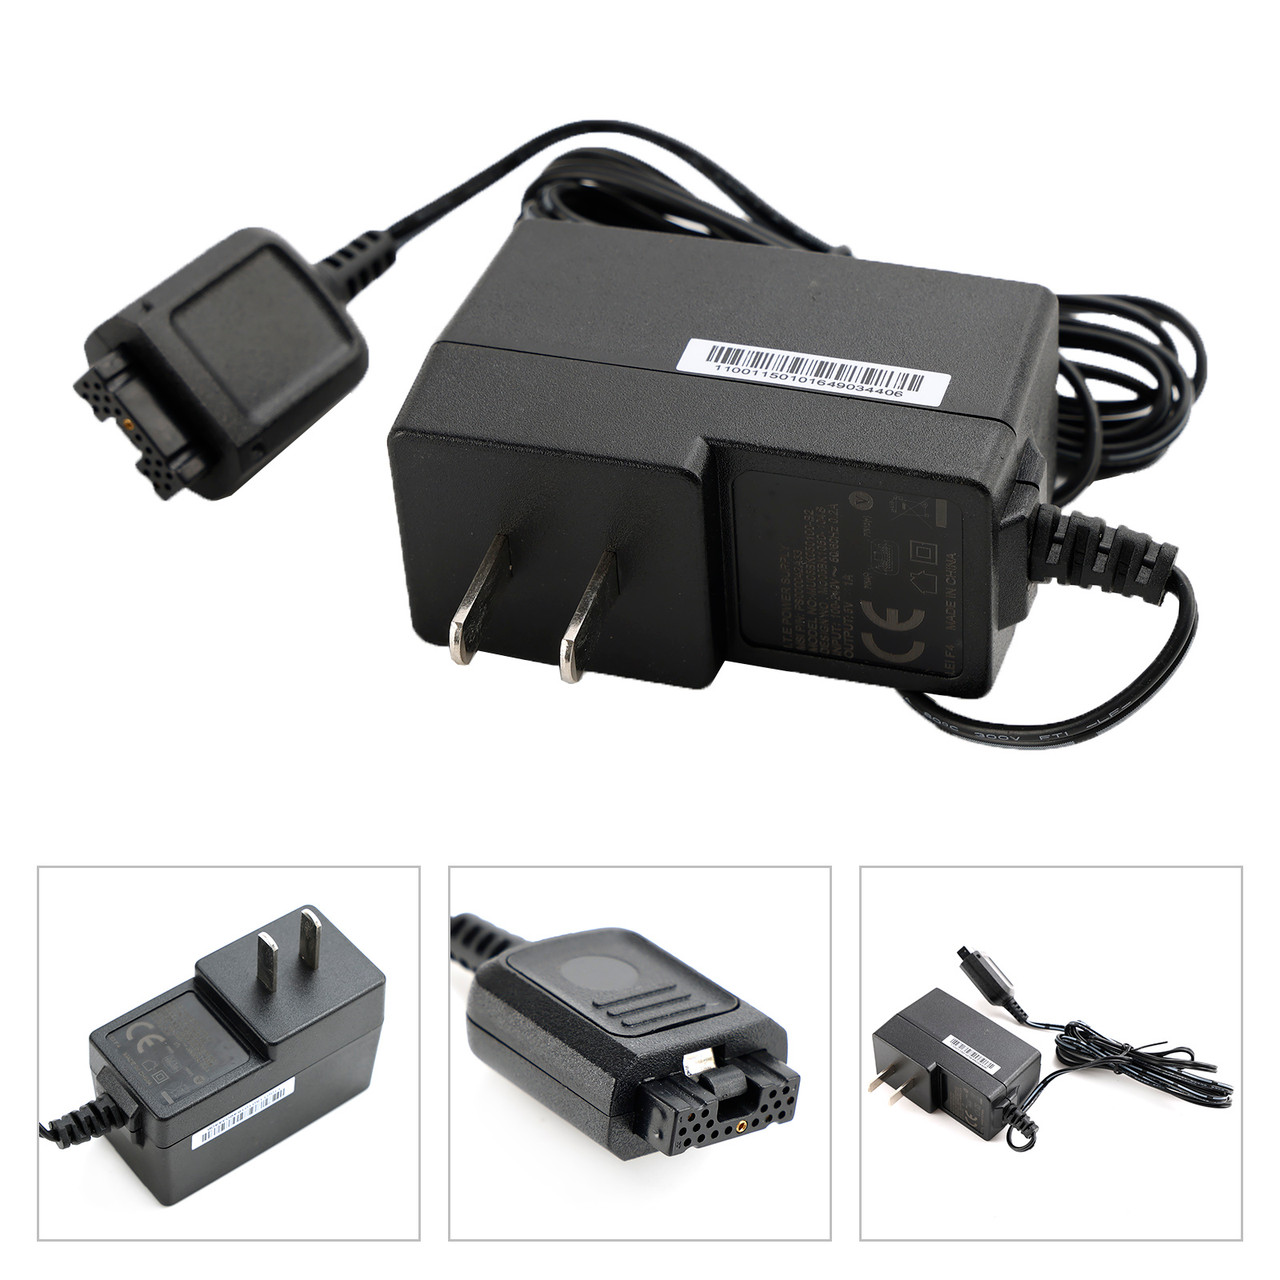 MTP3150/MTP3100 Battery Fast Rapid Dock Charger For MTP3150 MTP3100 Us Plug